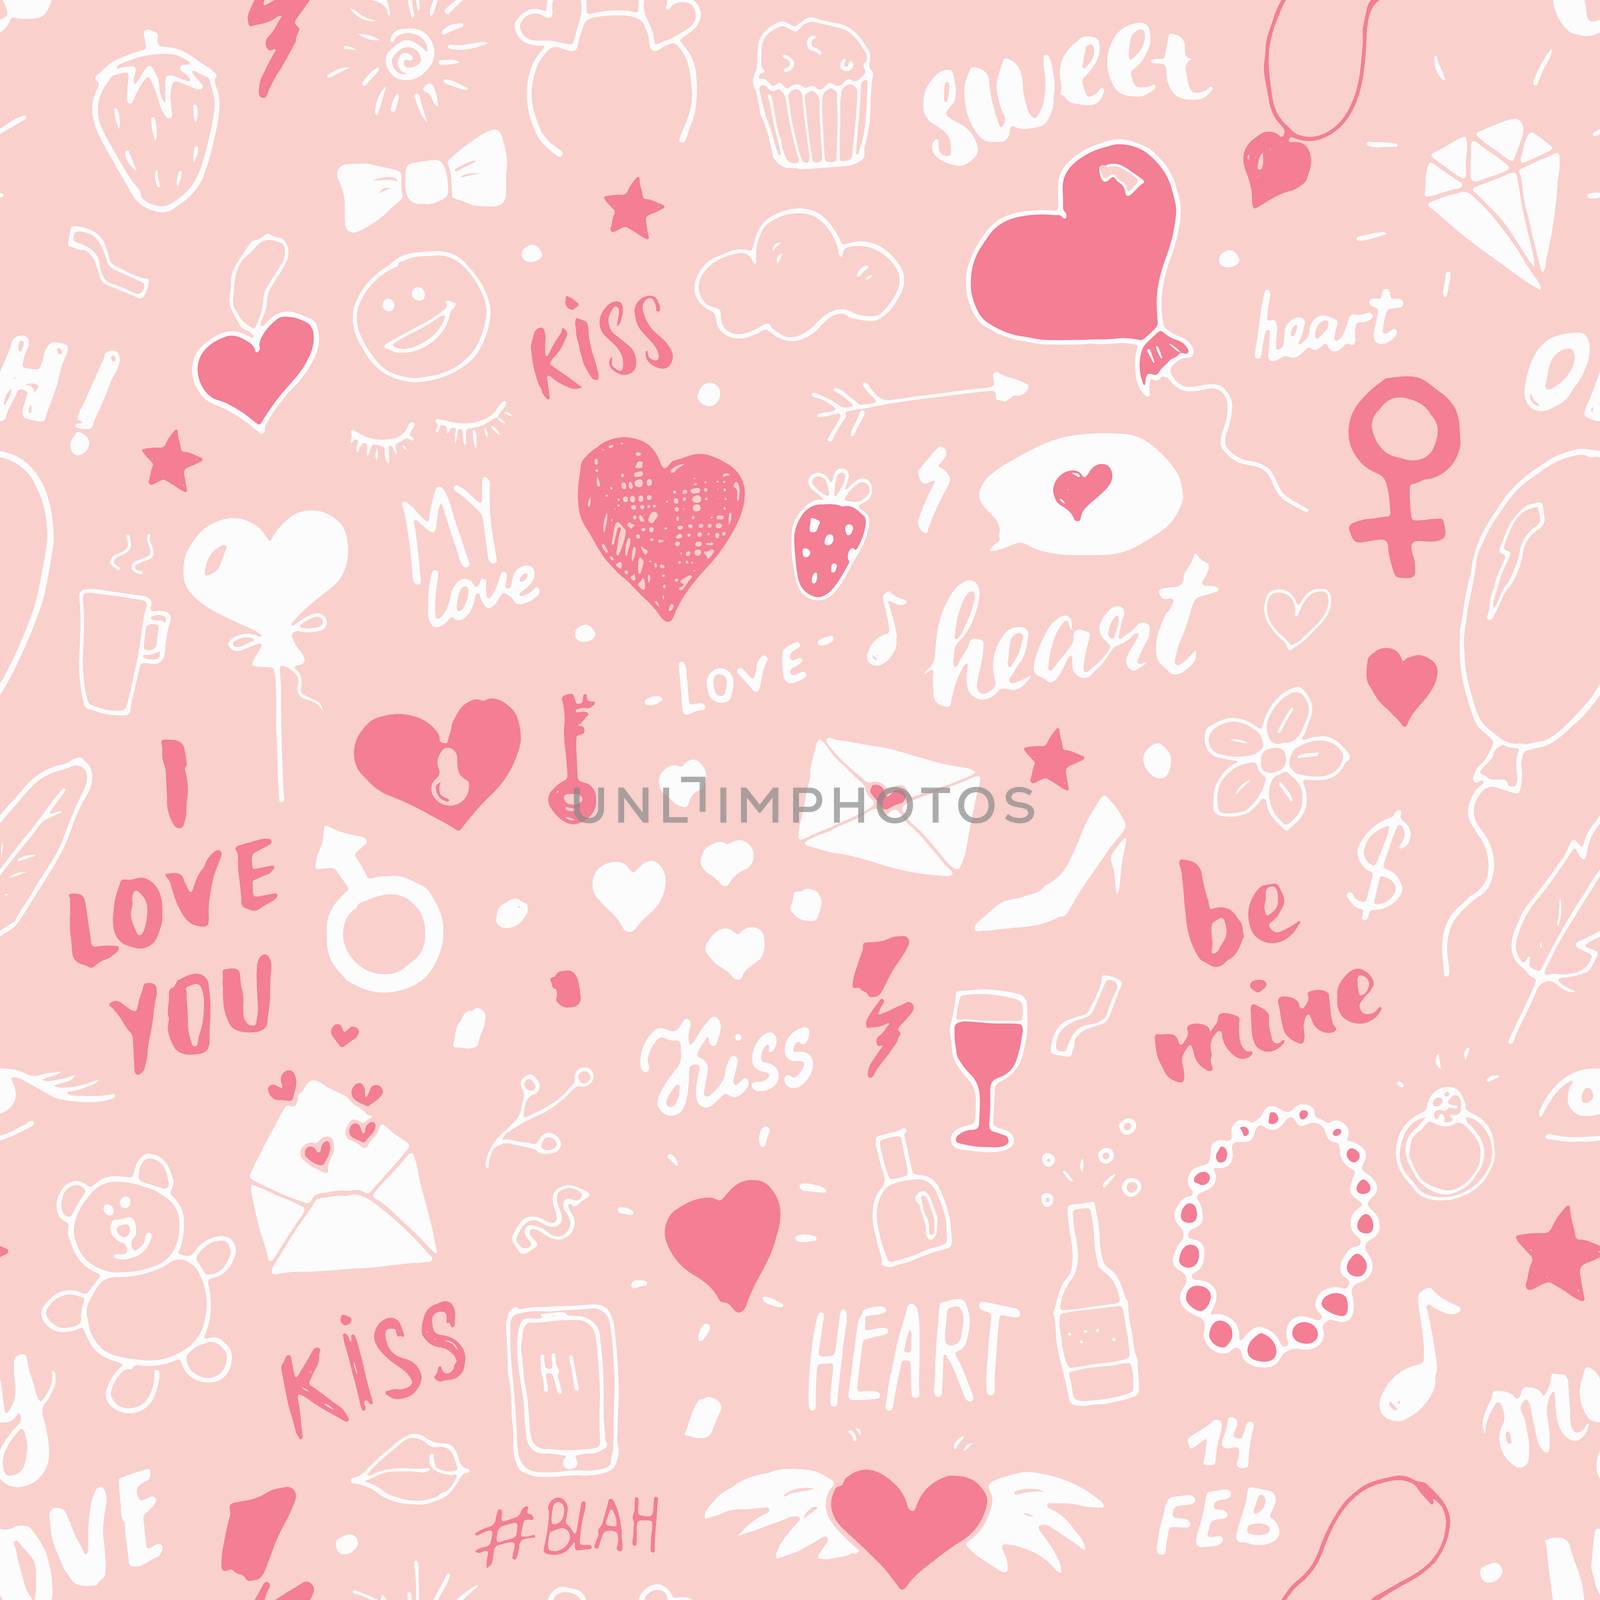 Love and Valentine Day seamless pattern vector illustration. Hand drawn sketched doodle romantic symbols background by Lemon_workshop